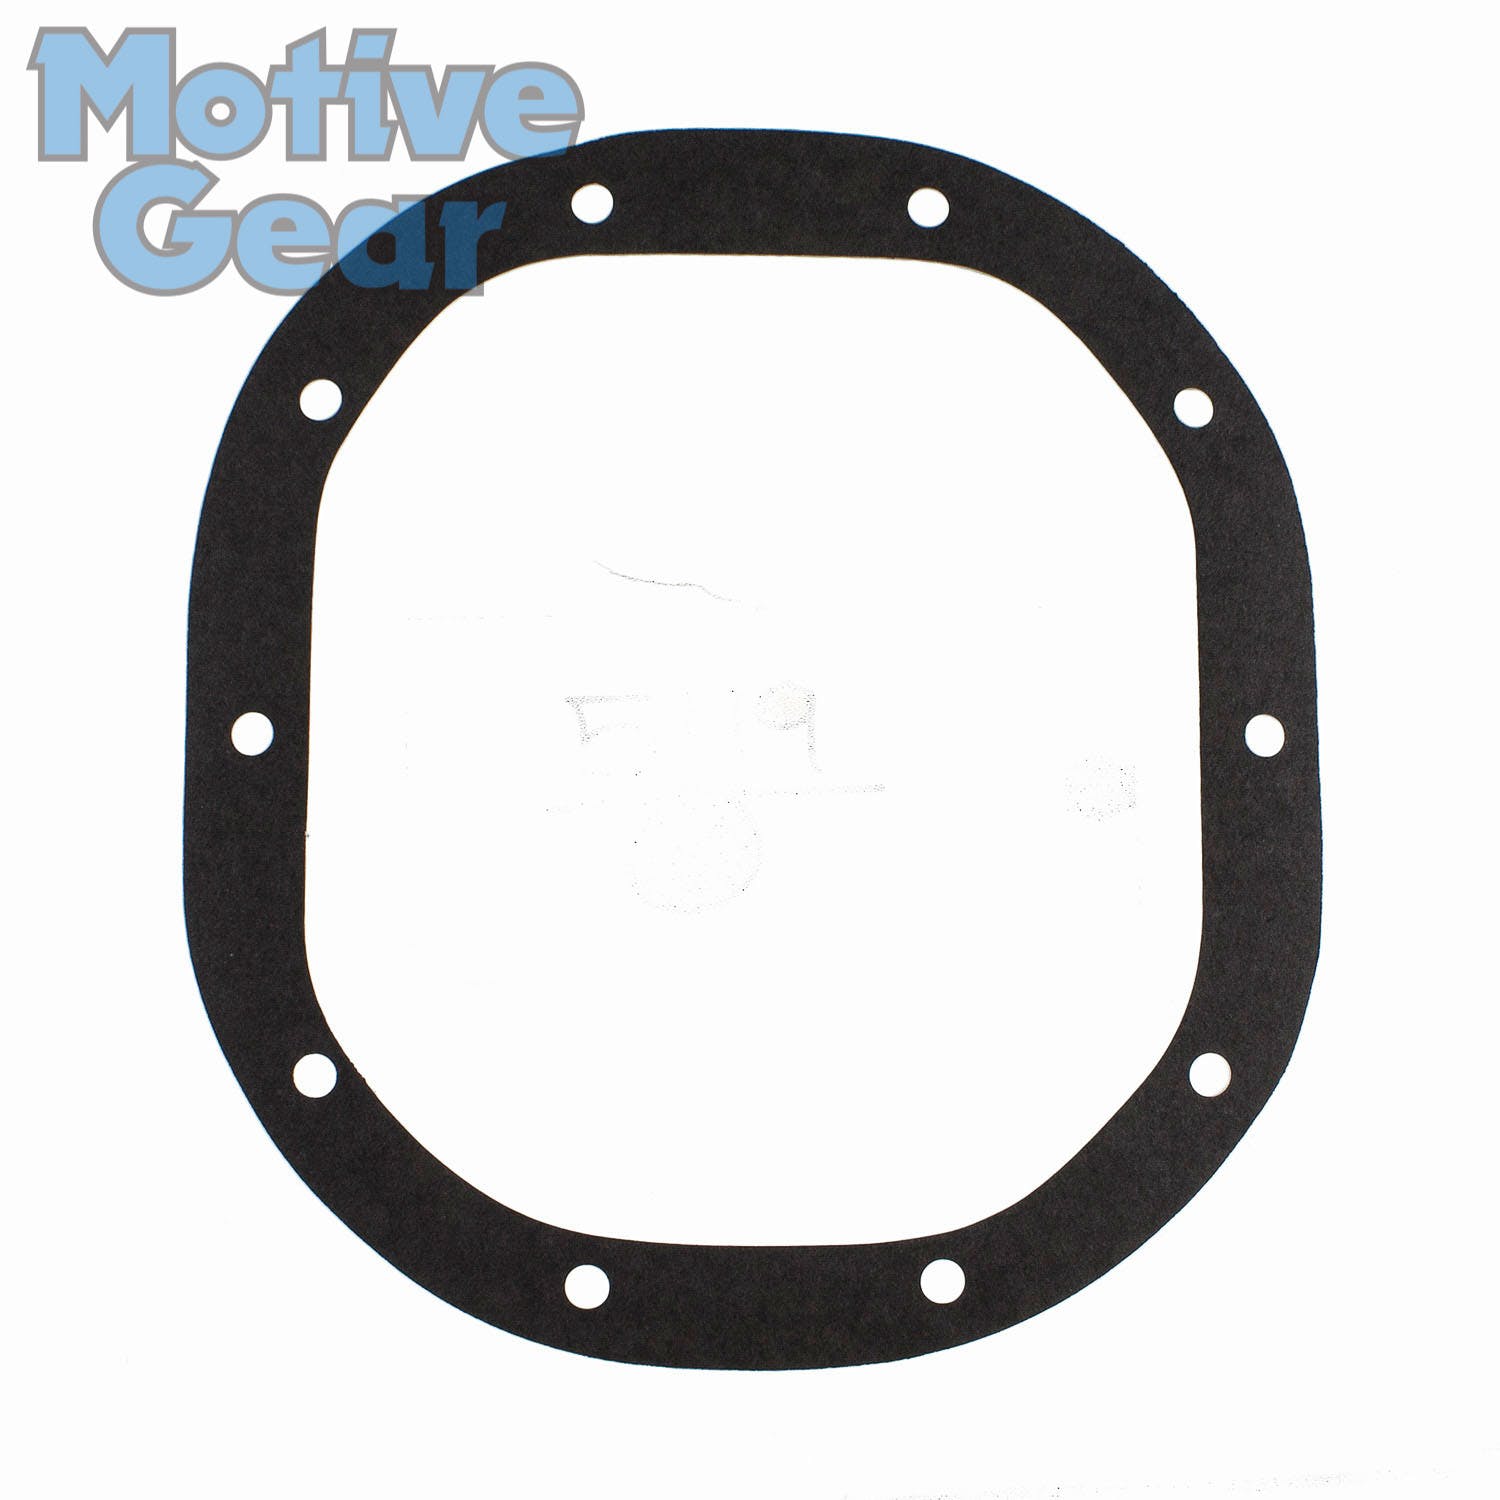 Motive Gear 5119 Differential Cover Gasket